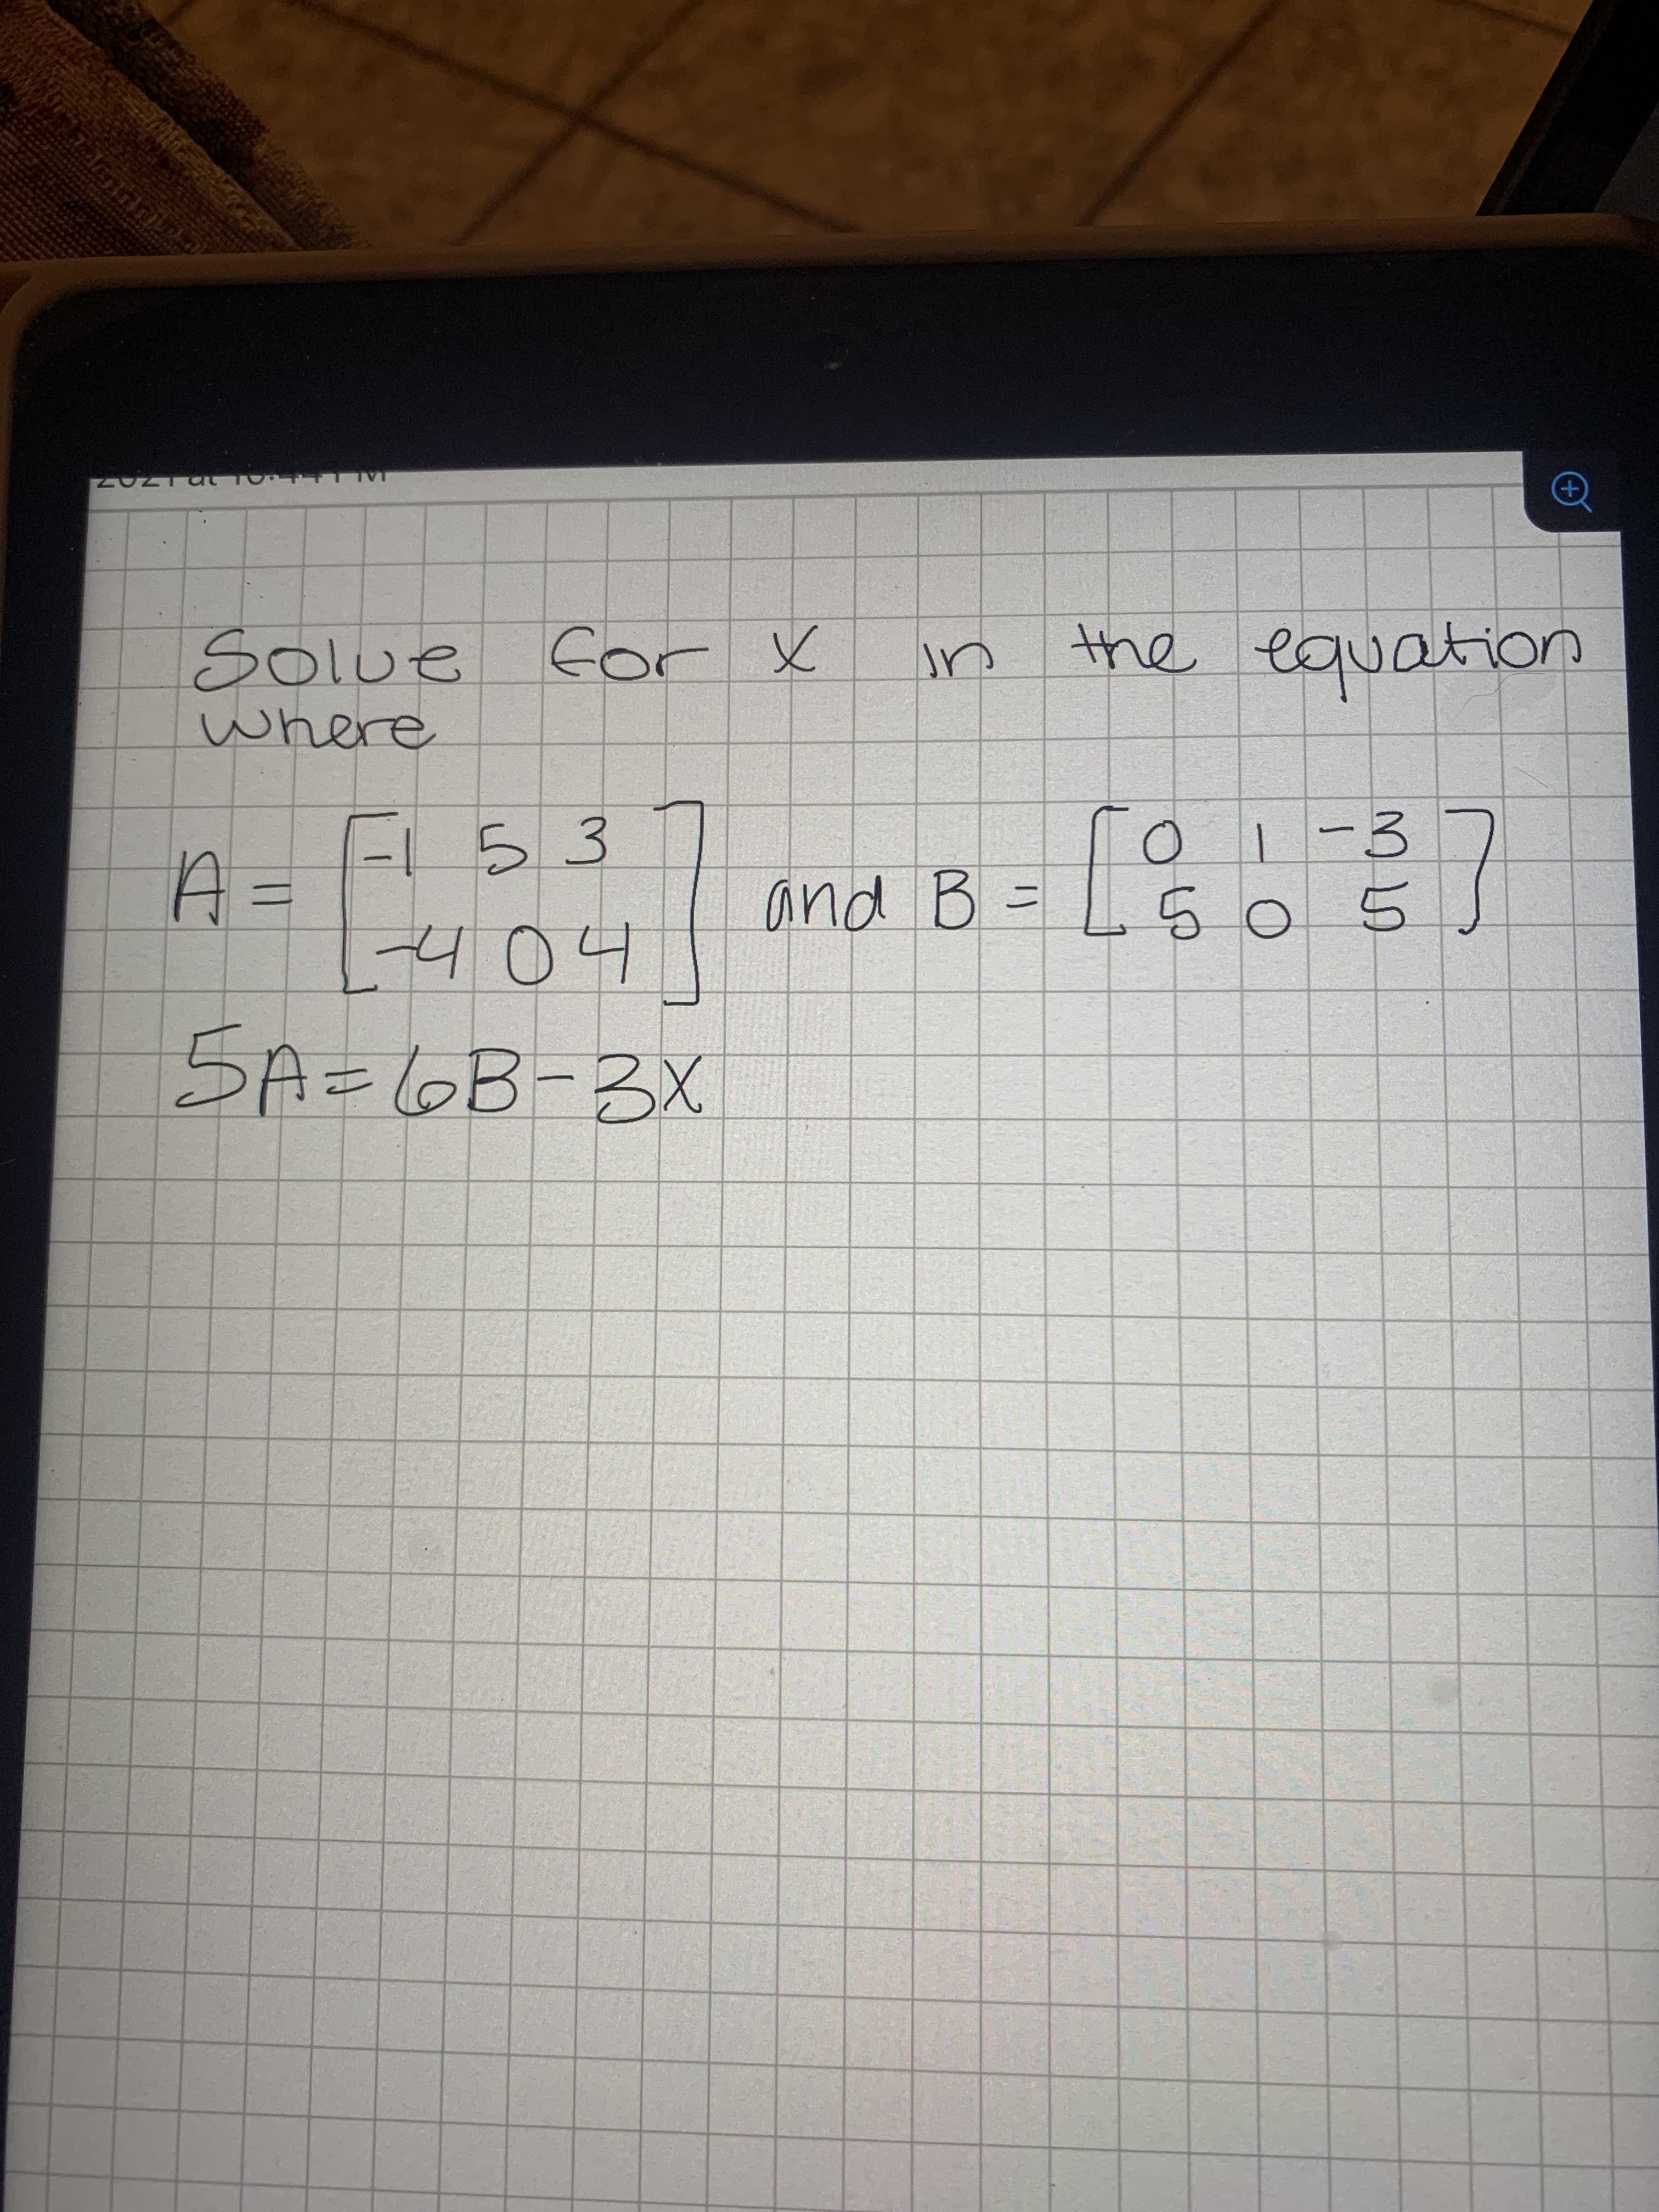 Solue for X
the equation
in
where
o i-3
505
-L53
A3=
and B =
-404
5A=68-3X
6B-3X
